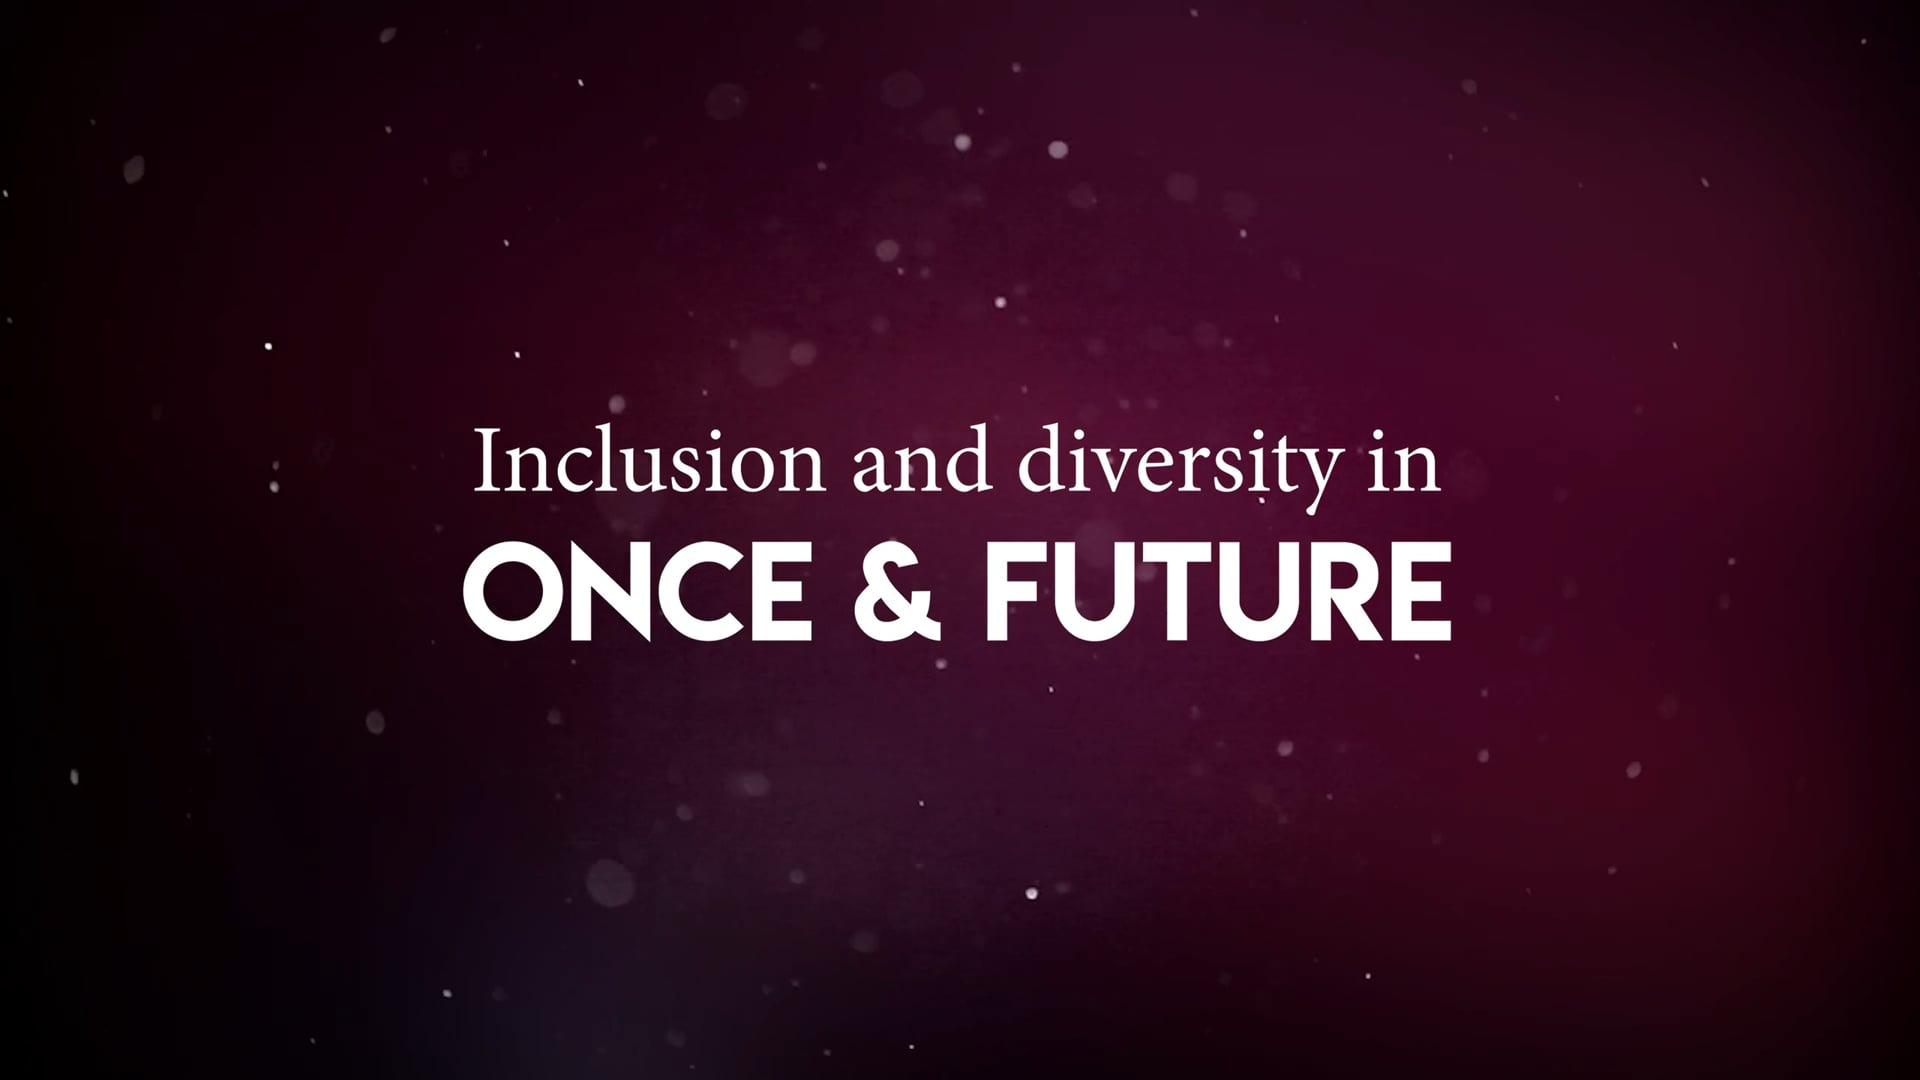 Inclusion and diversity in Once & Future